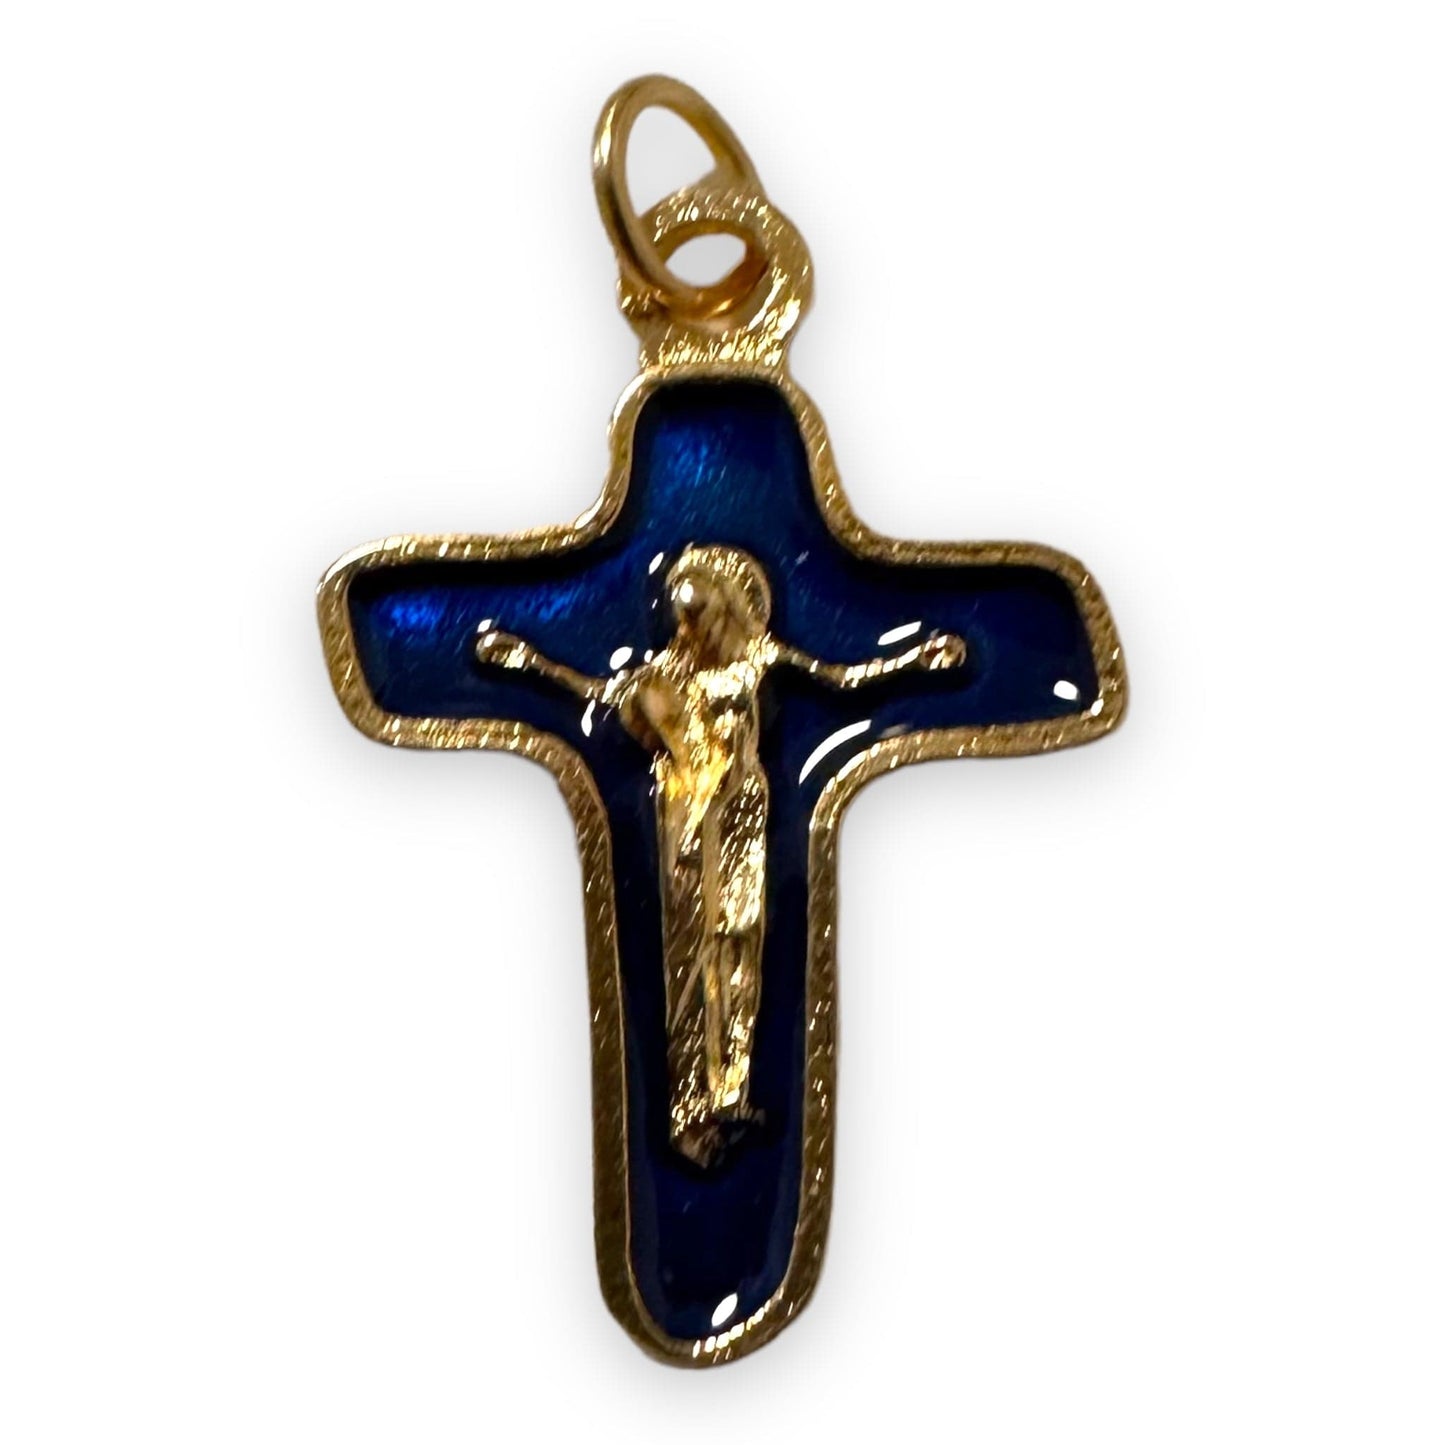 Catholically Crucifix Sorrowful Mother Pectoral Cross - 1" Small Crucifix - Blessed By Pope - Parts